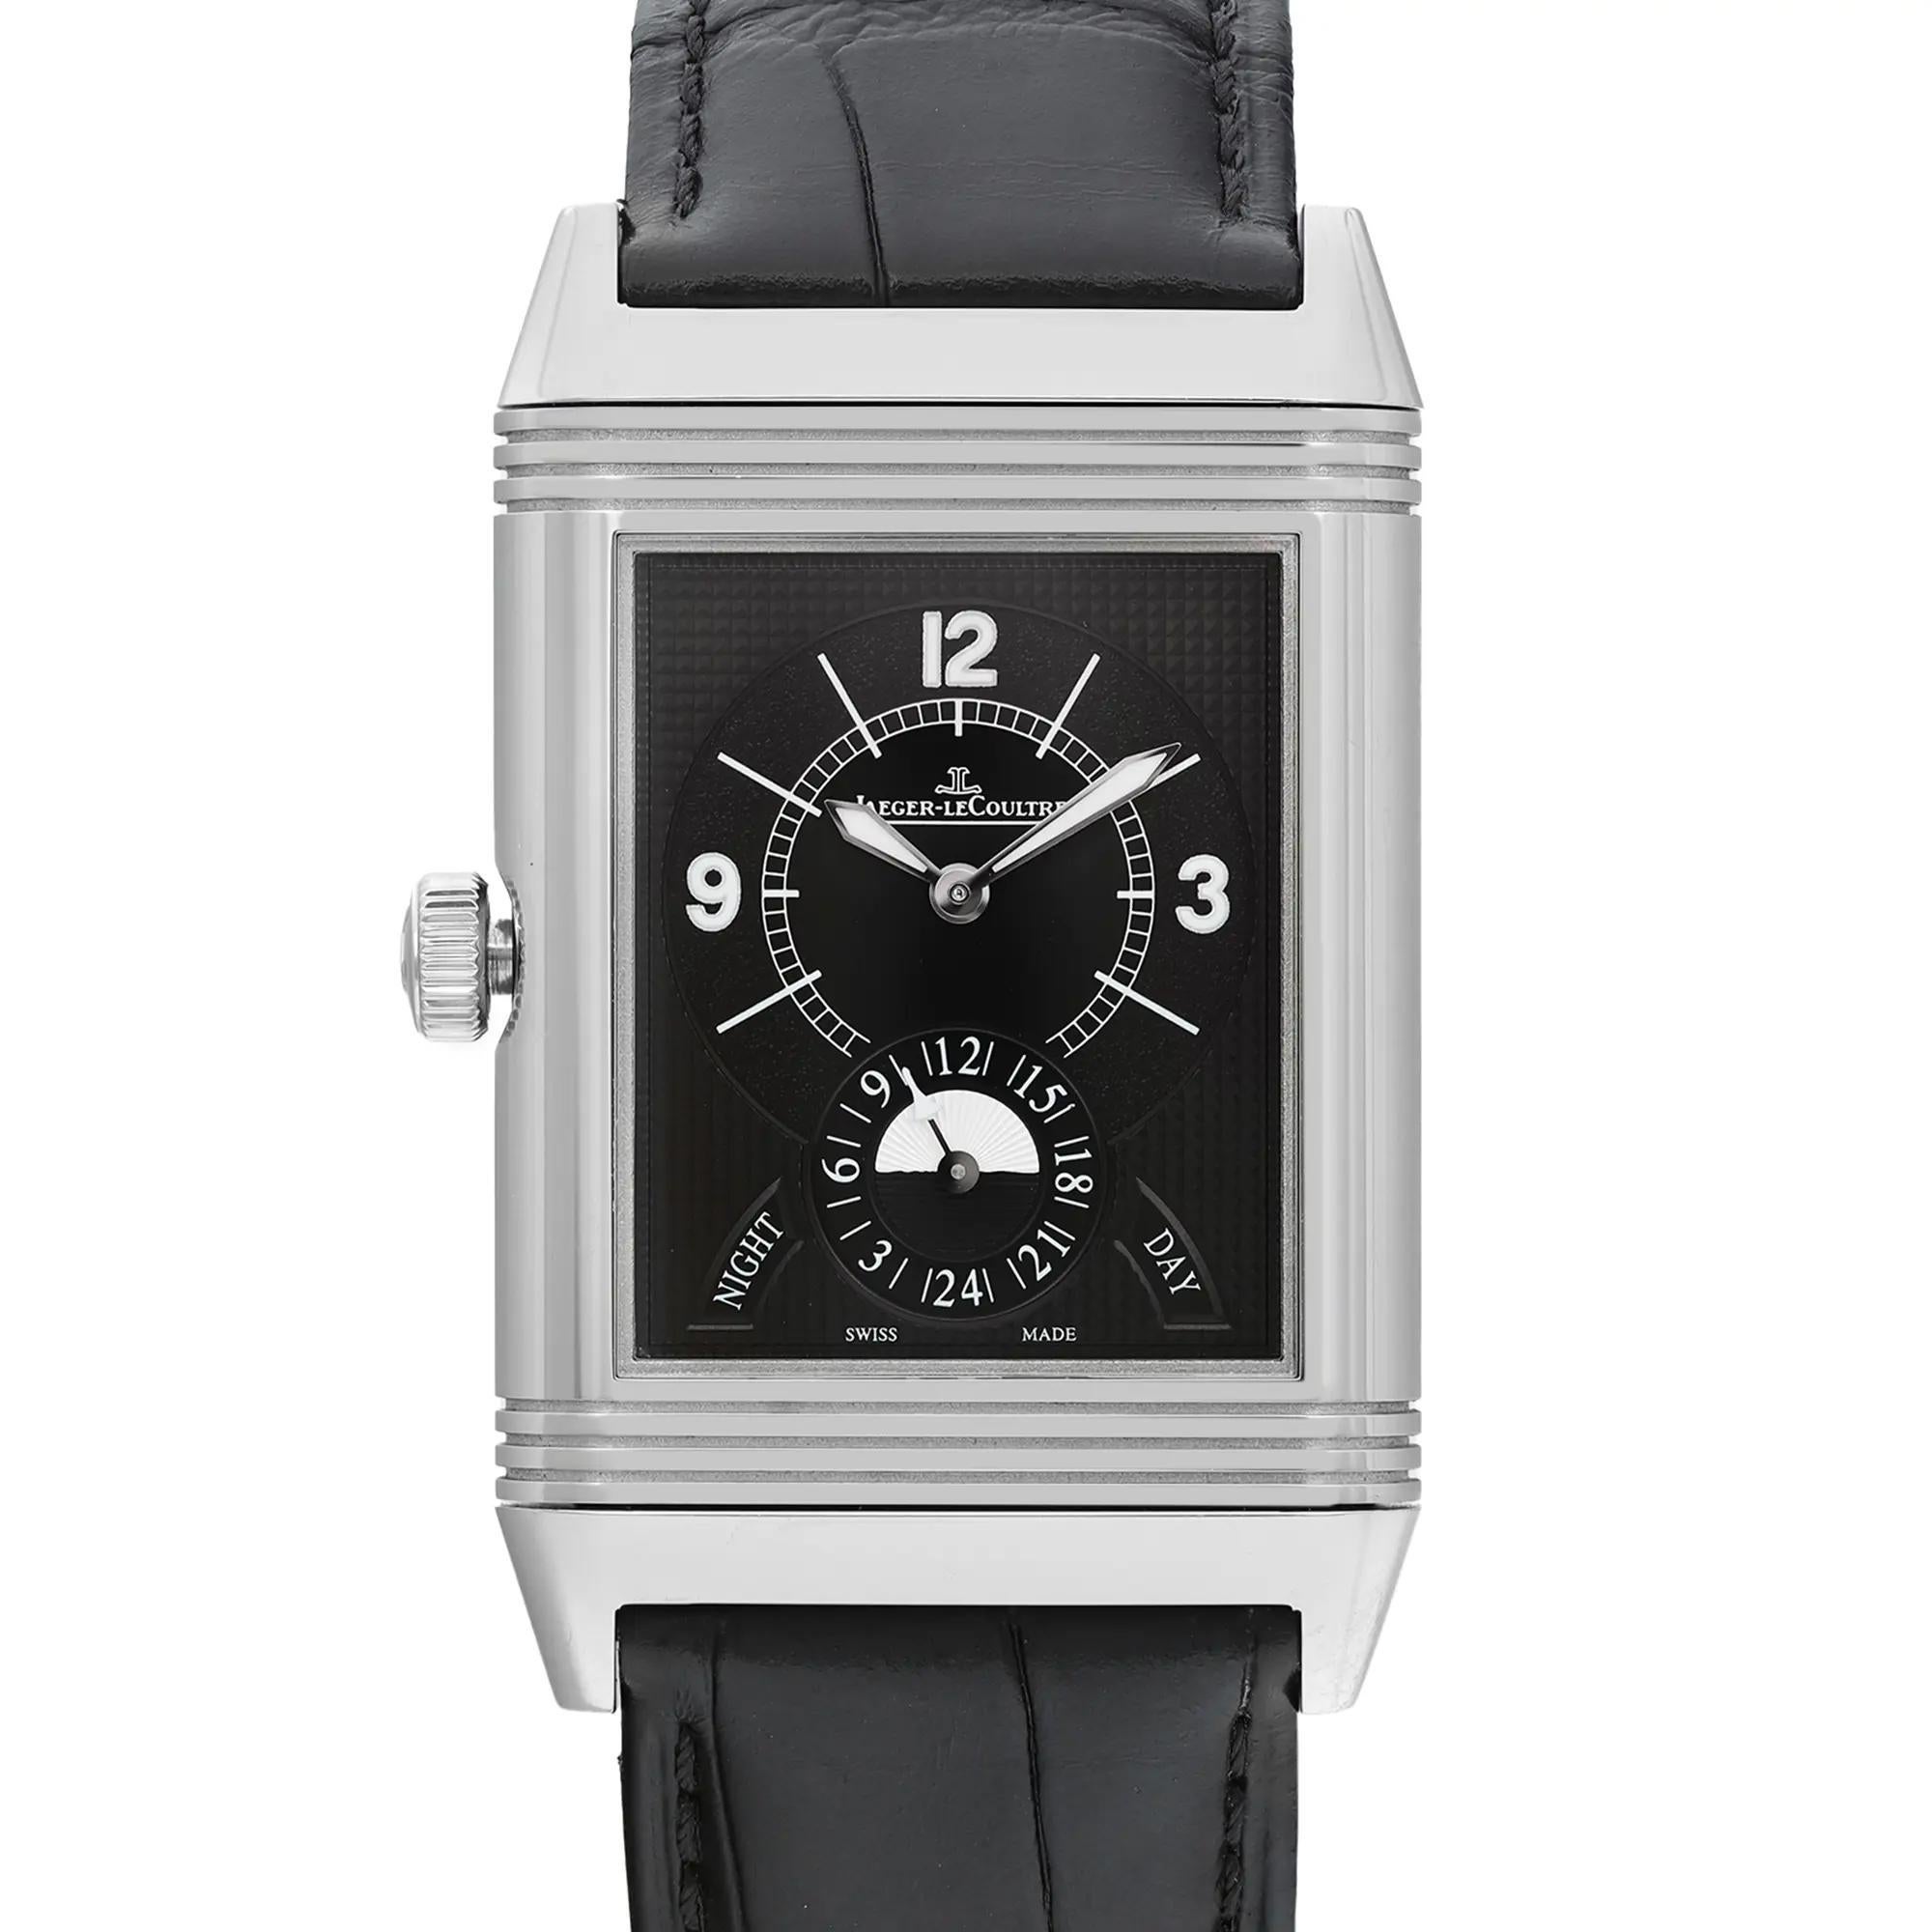 Jaeger LeCoultre Grande Reverso Duo Steel Silver Dial Watch 273.8.85 Q3748420 In Excellent Condition For Sale In New York, NY